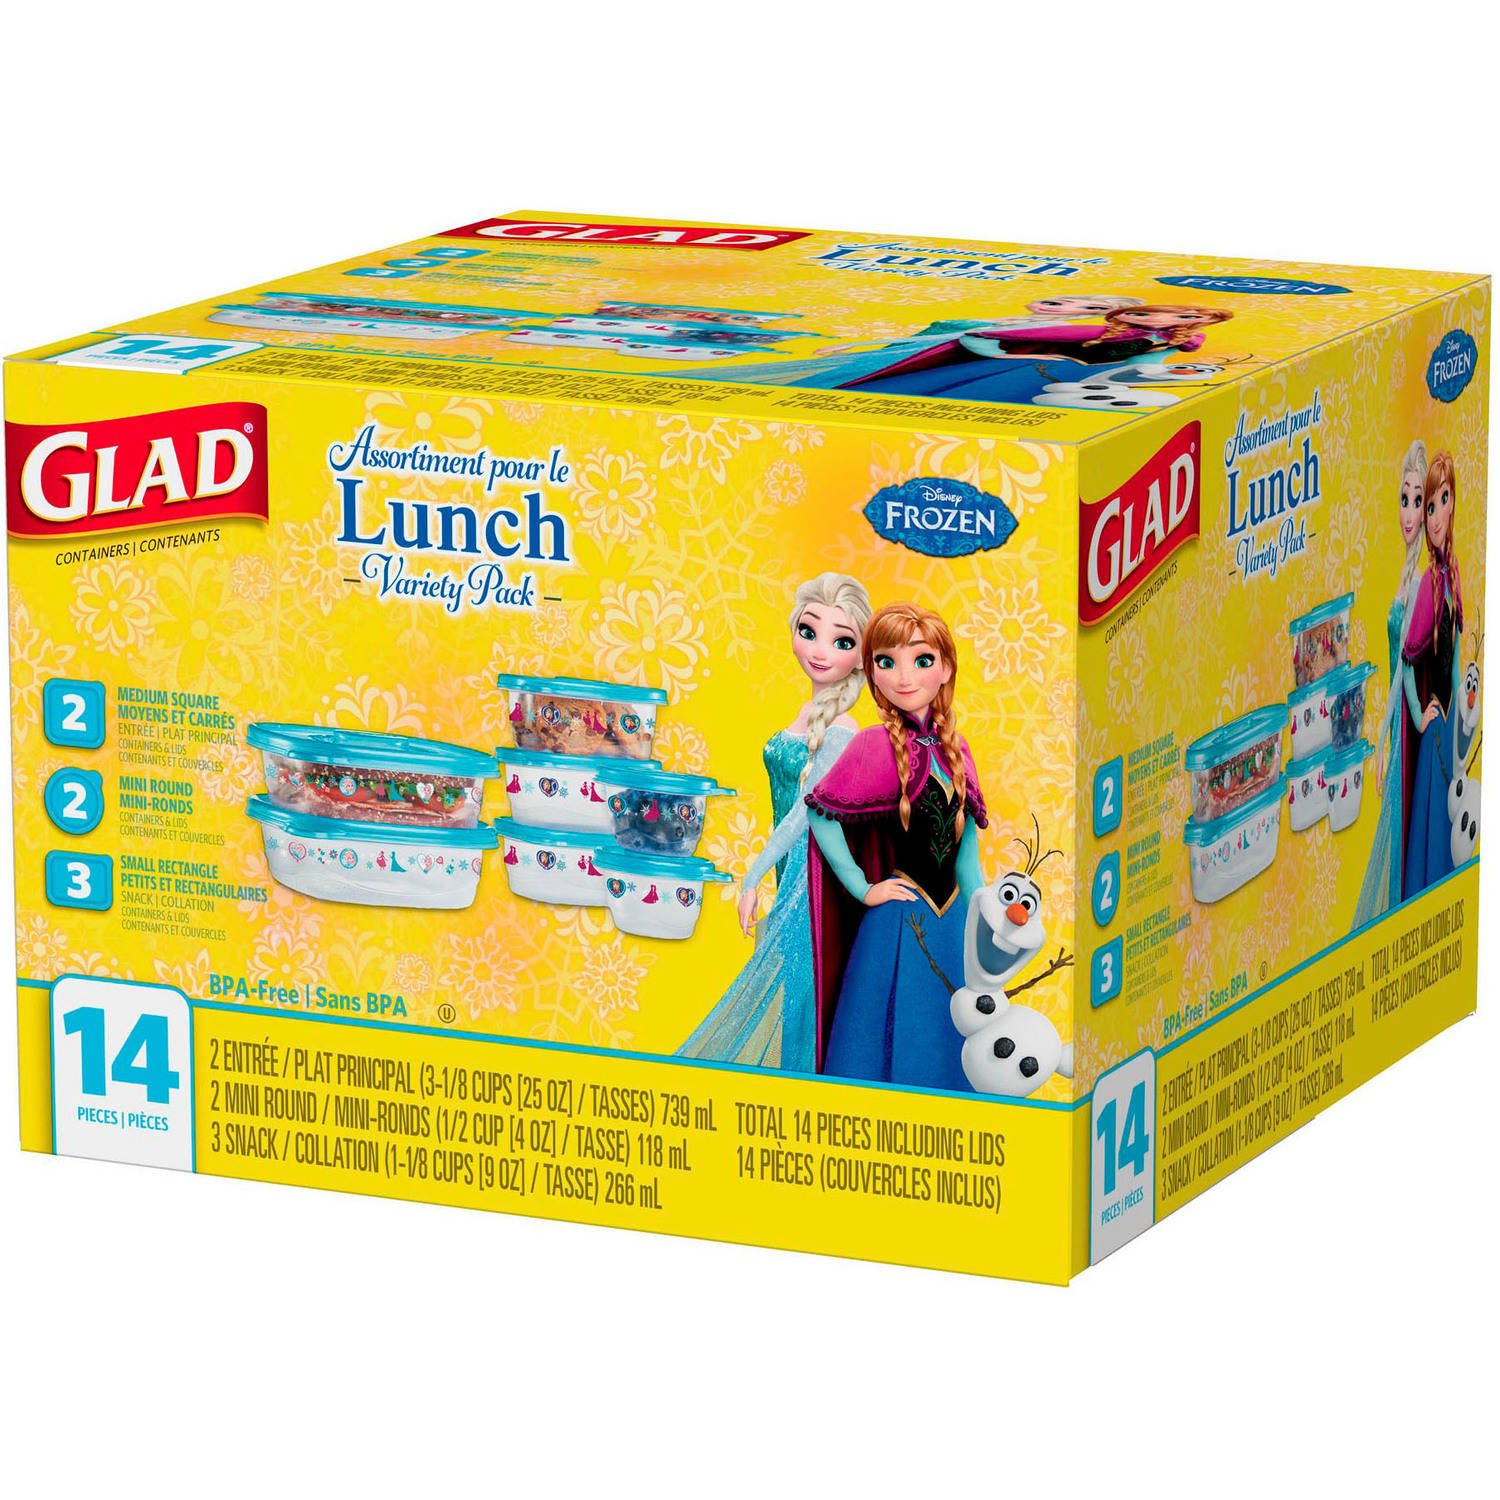 Glad Lunch Variety Pack Disney Frozen Food Storage Containers, BPA Free, 14 pk - image 2 of 8